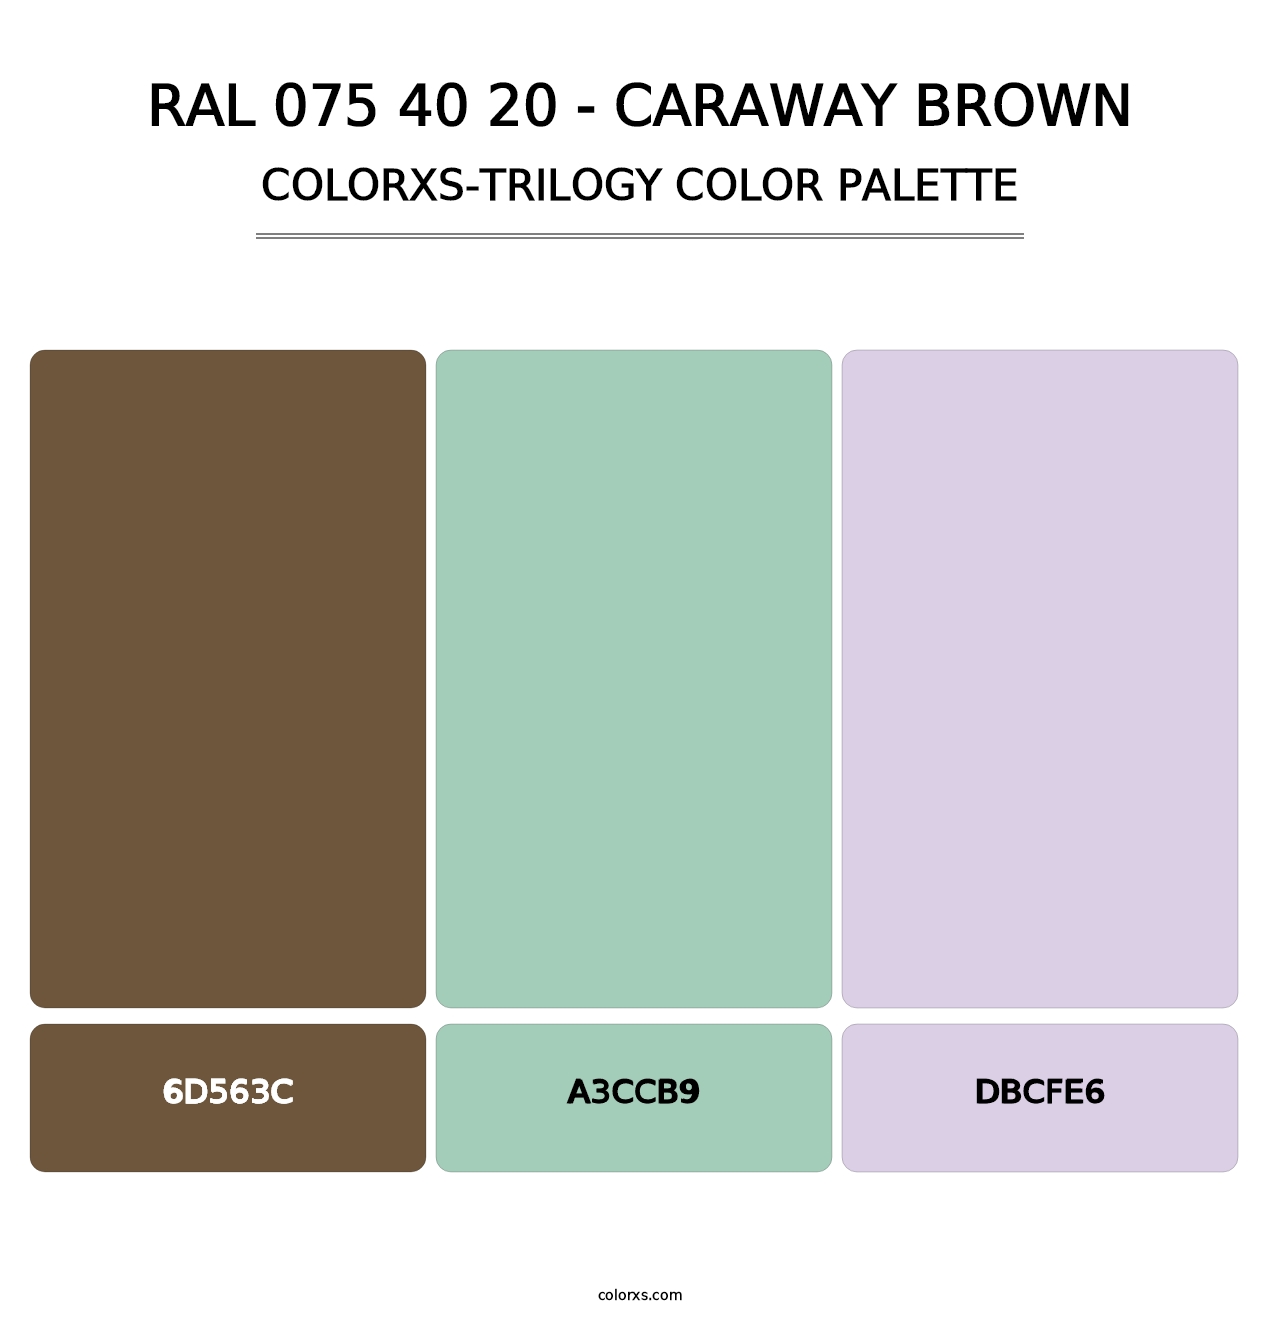 RAL 075 40 20 - Caraway Brown - Colorxs Trilogy Palette